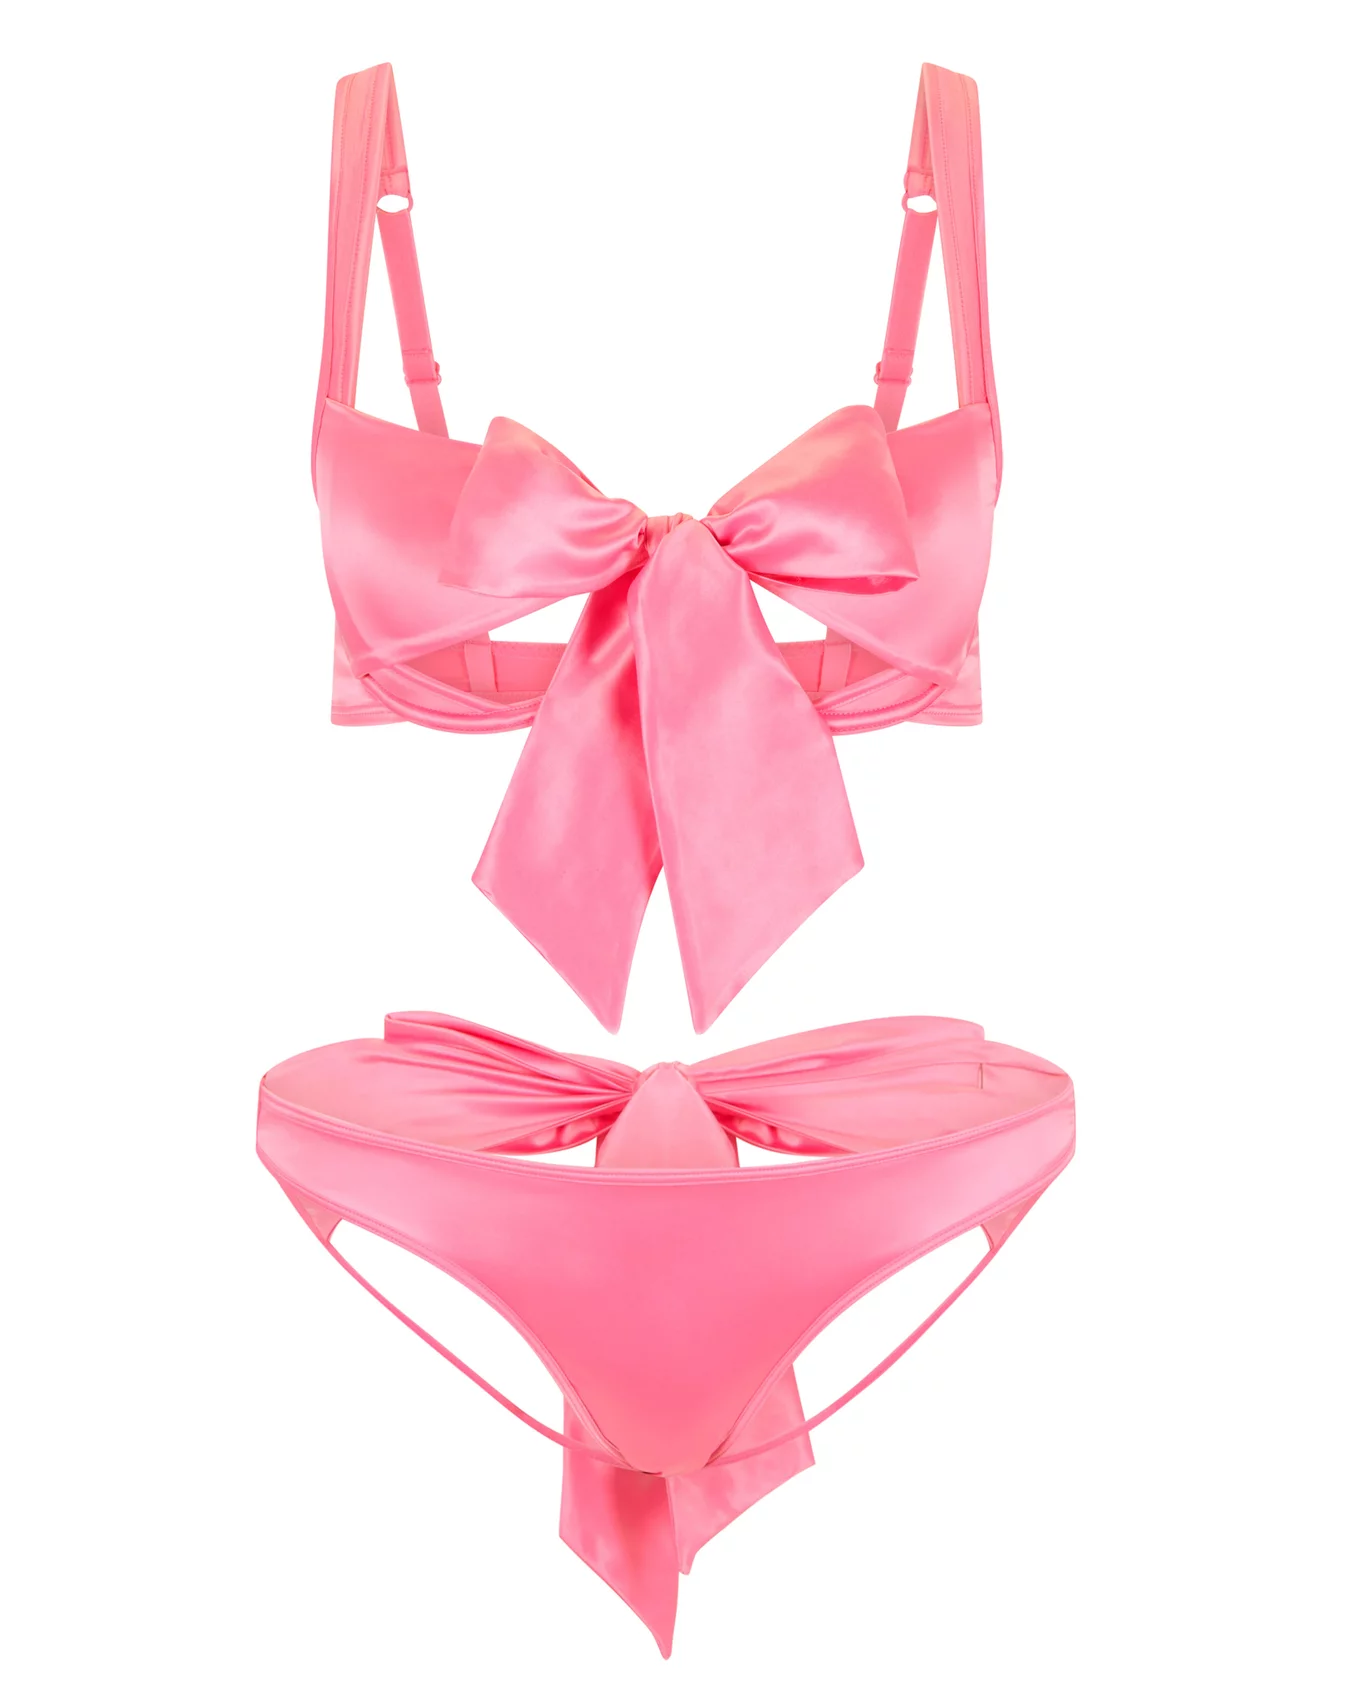 NEW Just In! The Gynger Bra & Panty Set—in PINK. 🎀 - Adore Me